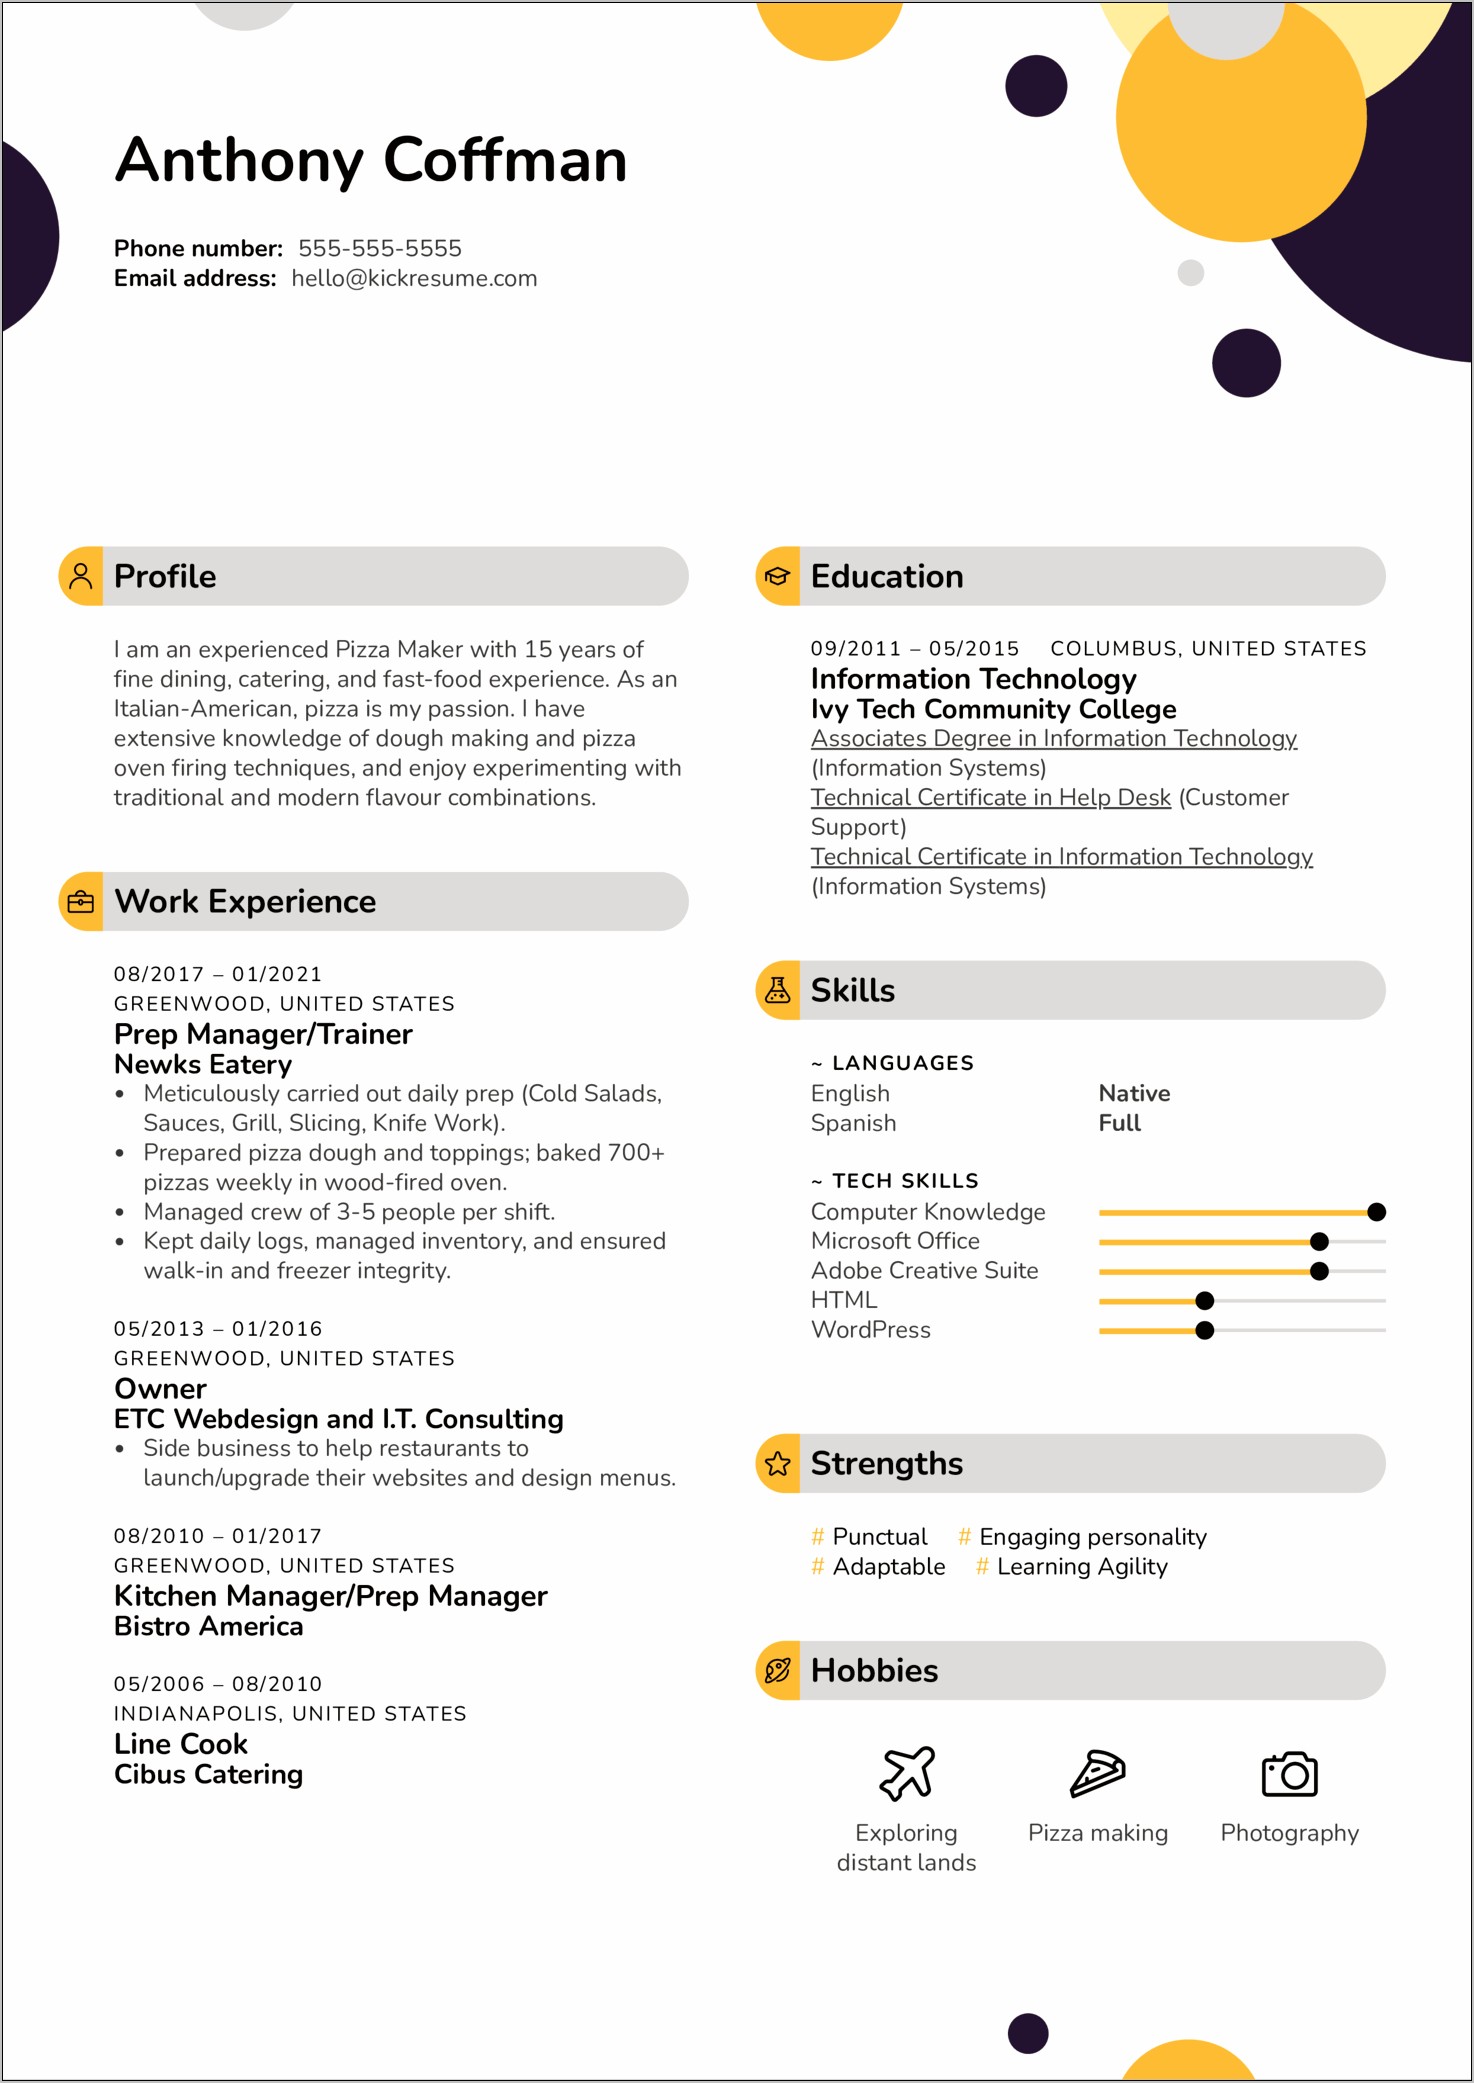 Ivy Tech College Simple Completed Resume Examples